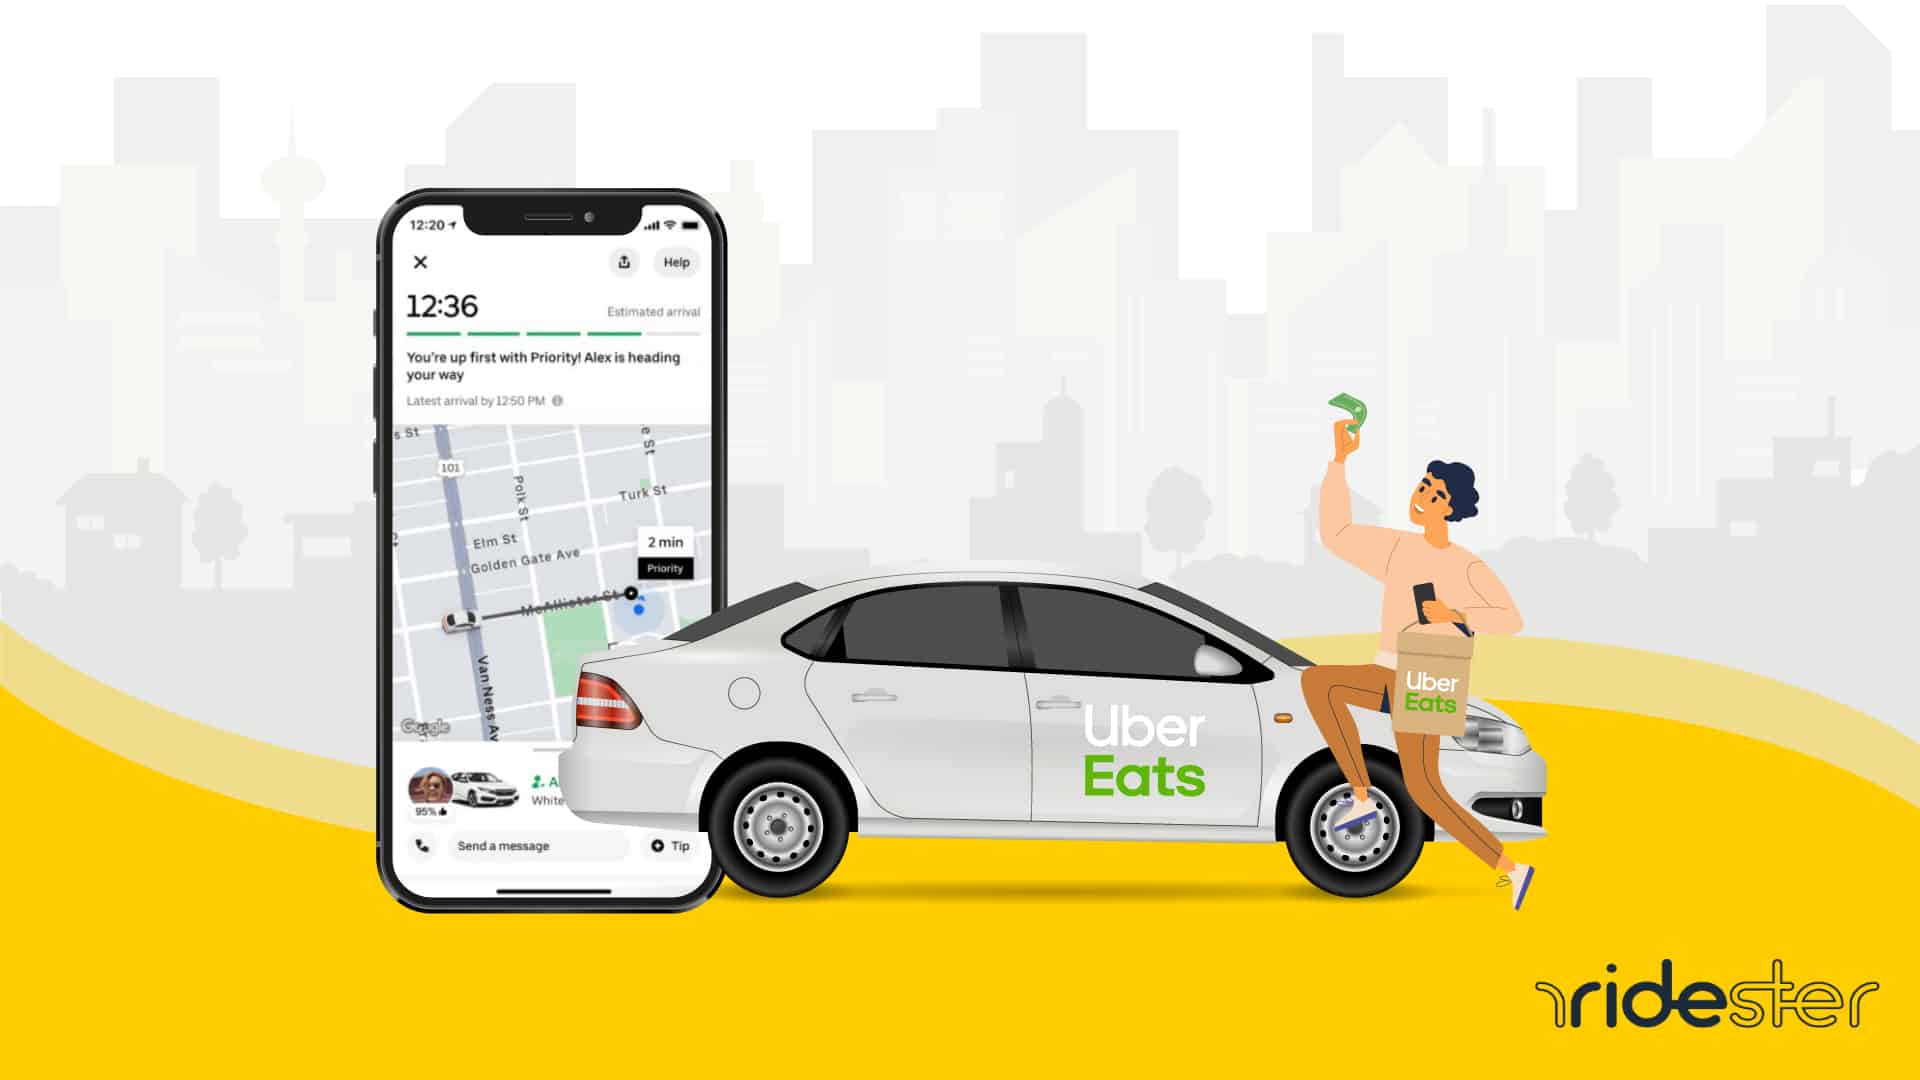 vector graphic showing an Uber Eats customer celebrating because they found an Uber Eats promo code